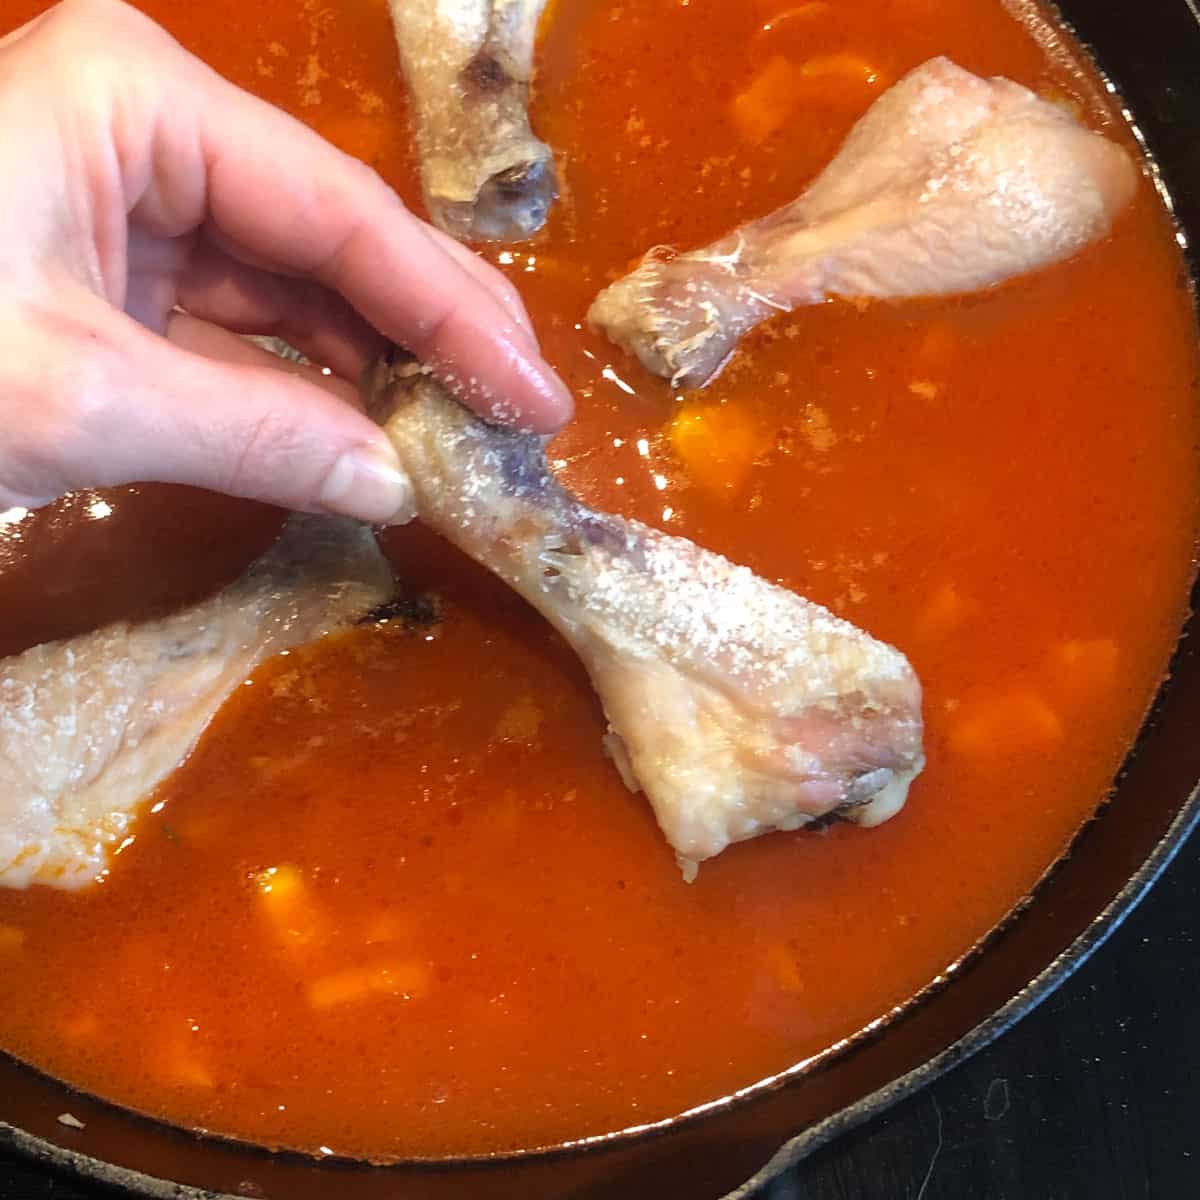 A picture of a recipe step - adding roasted chicken drumstick to a pan with paella ingredients.